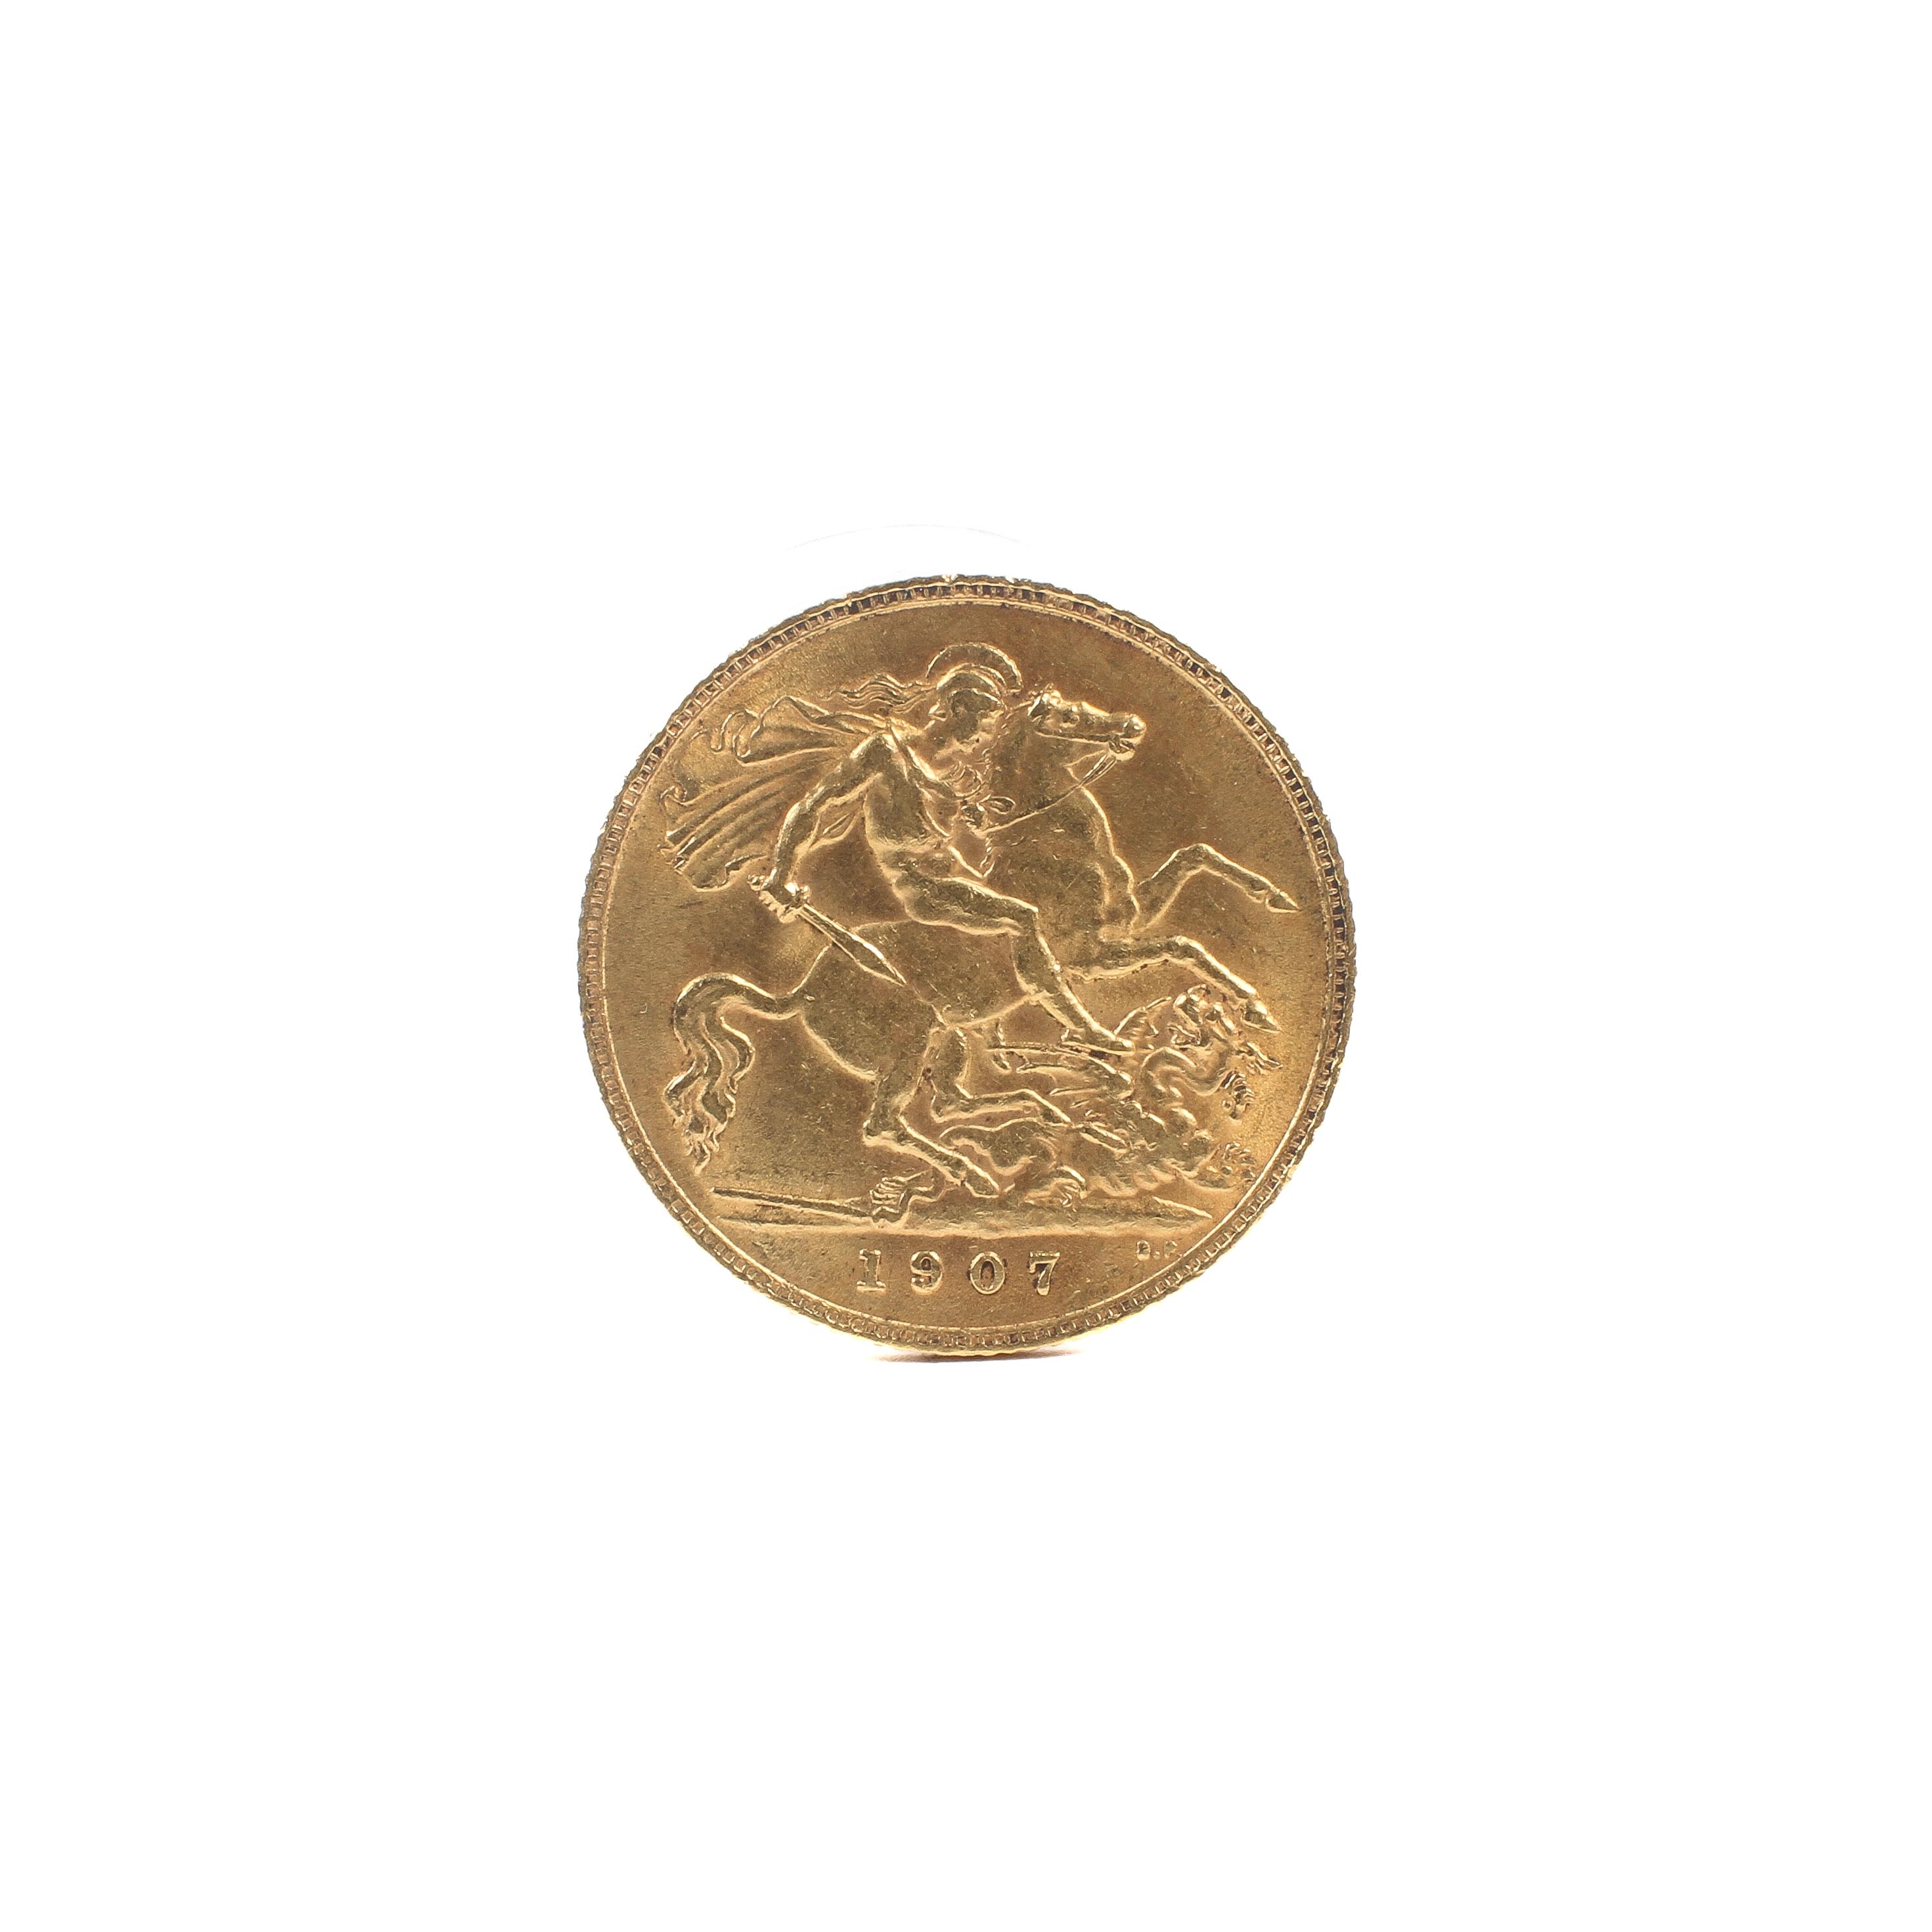 An Edwardian half sovereign. Dated 1907. - Image 2 of 2